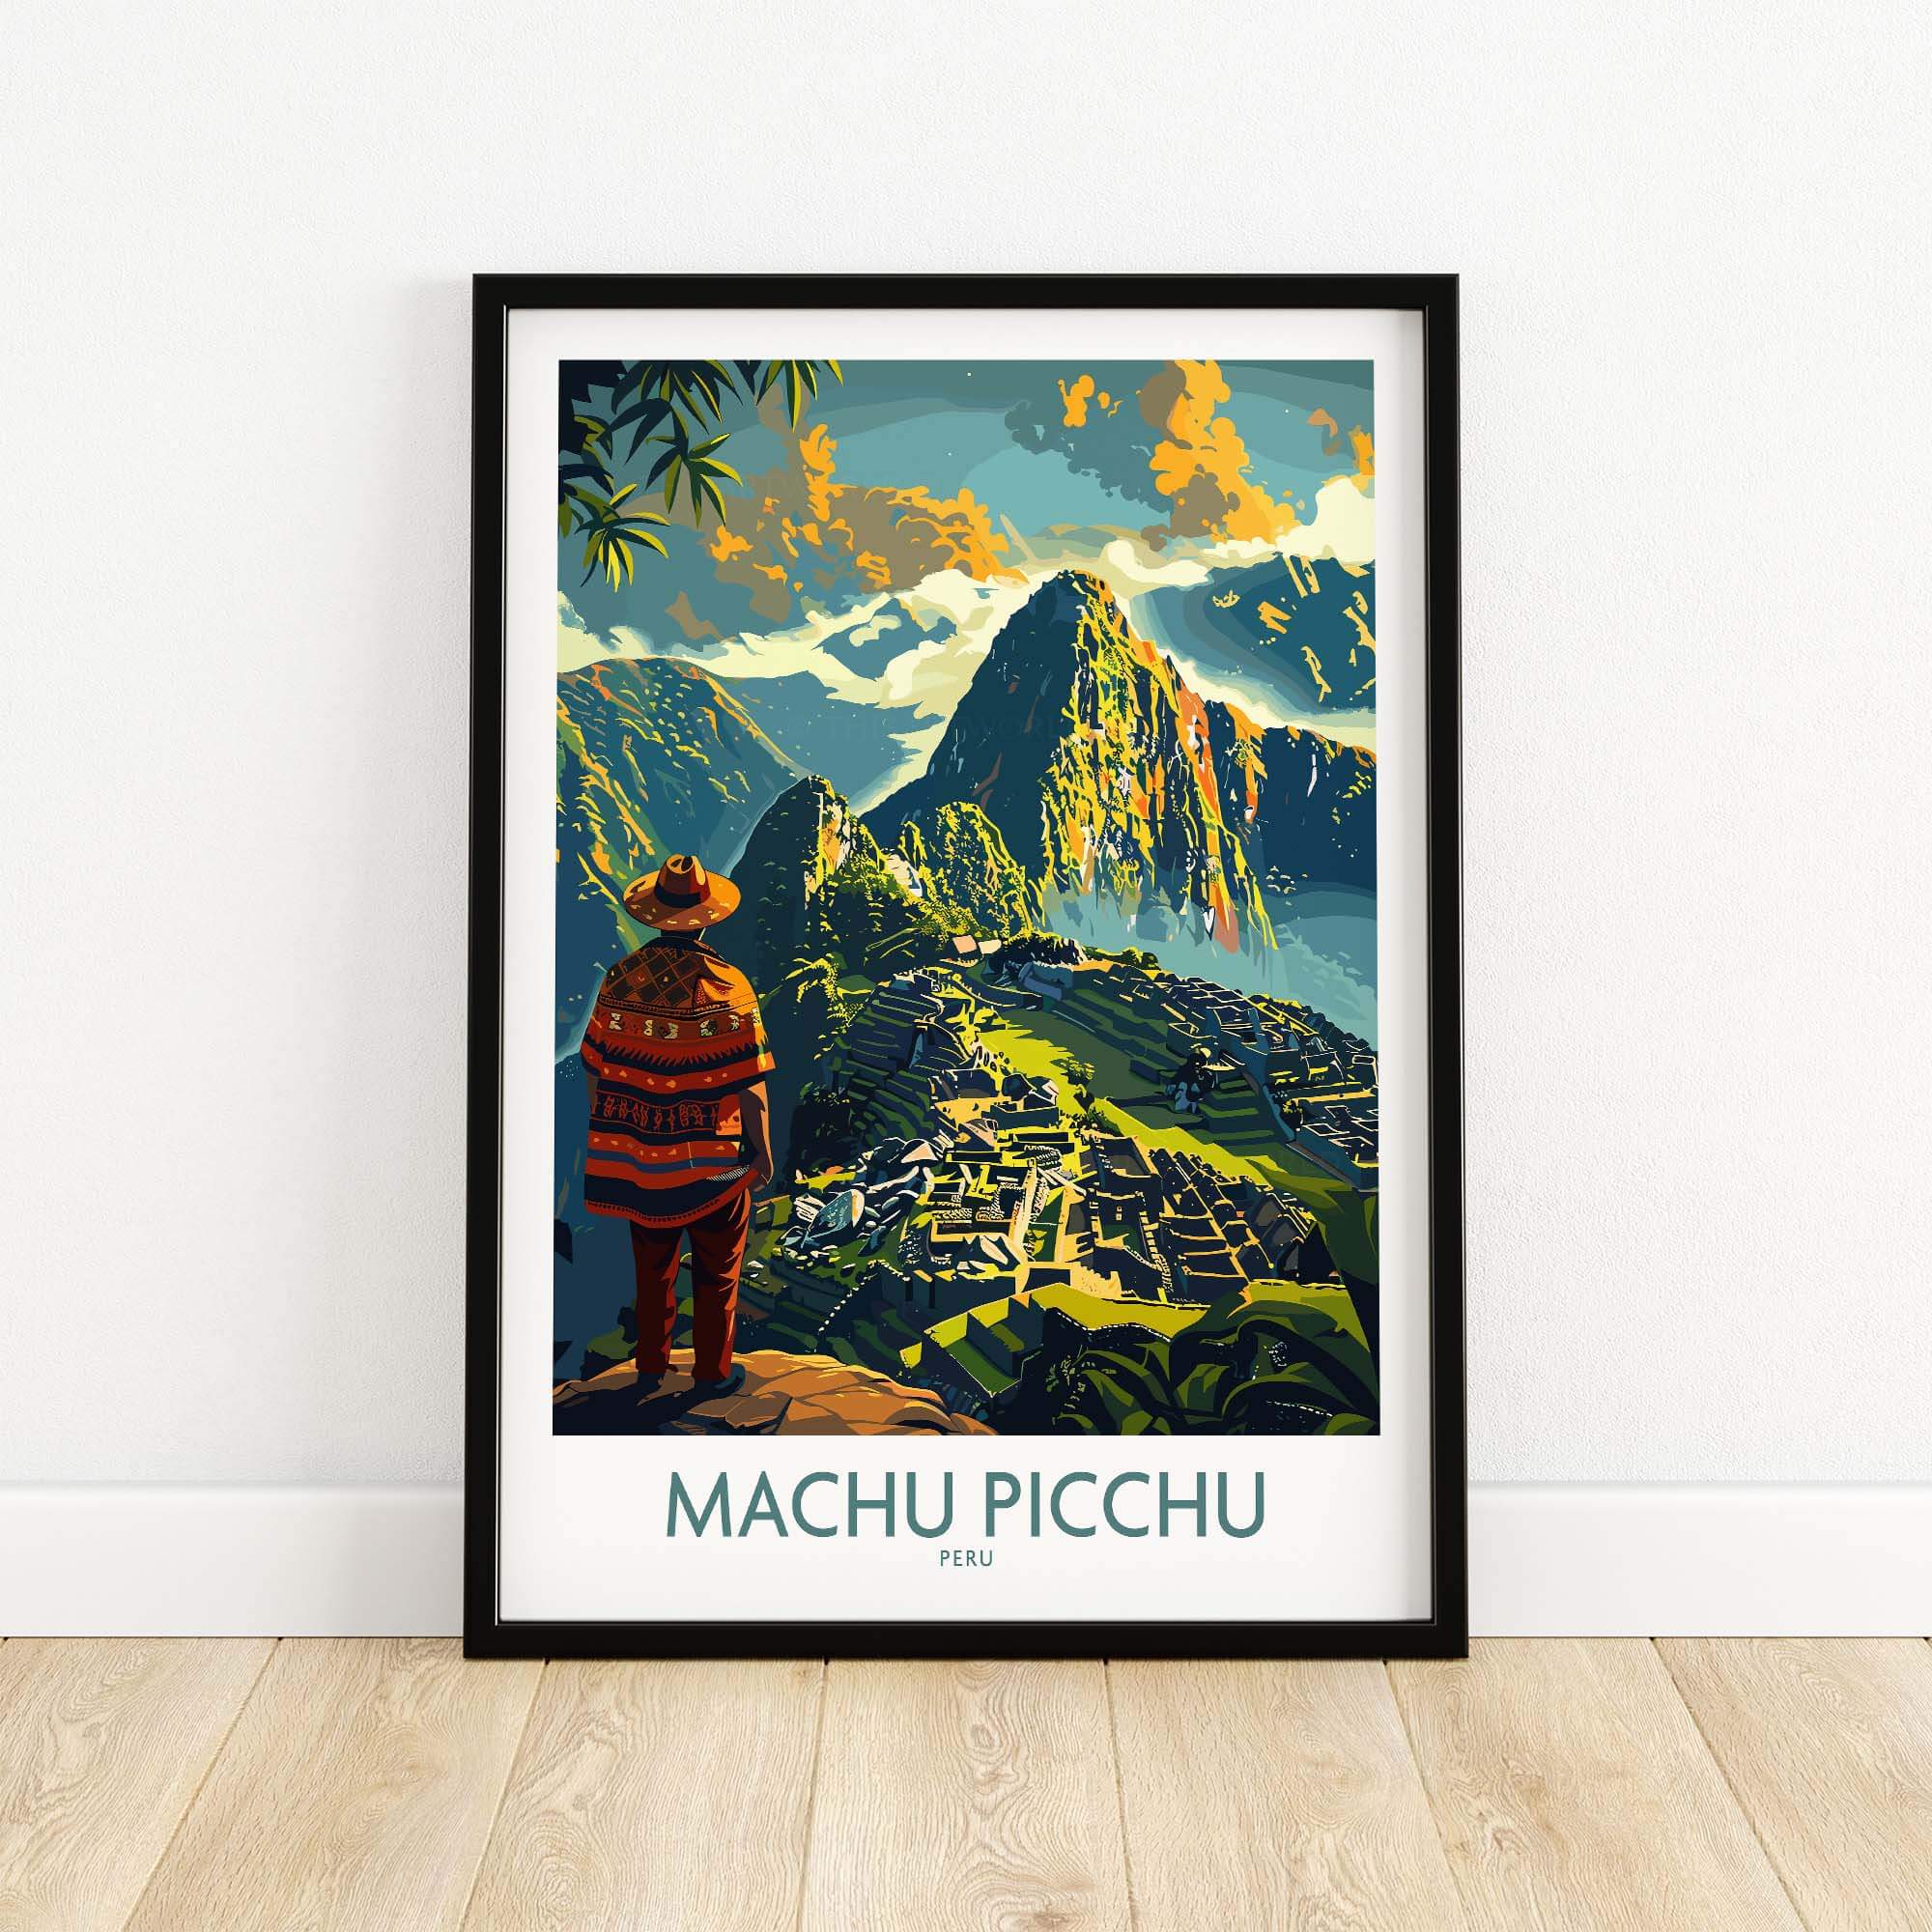 Machu Picchu Travel Poster view our best collection or travel posters and prints - ThisArtWorld